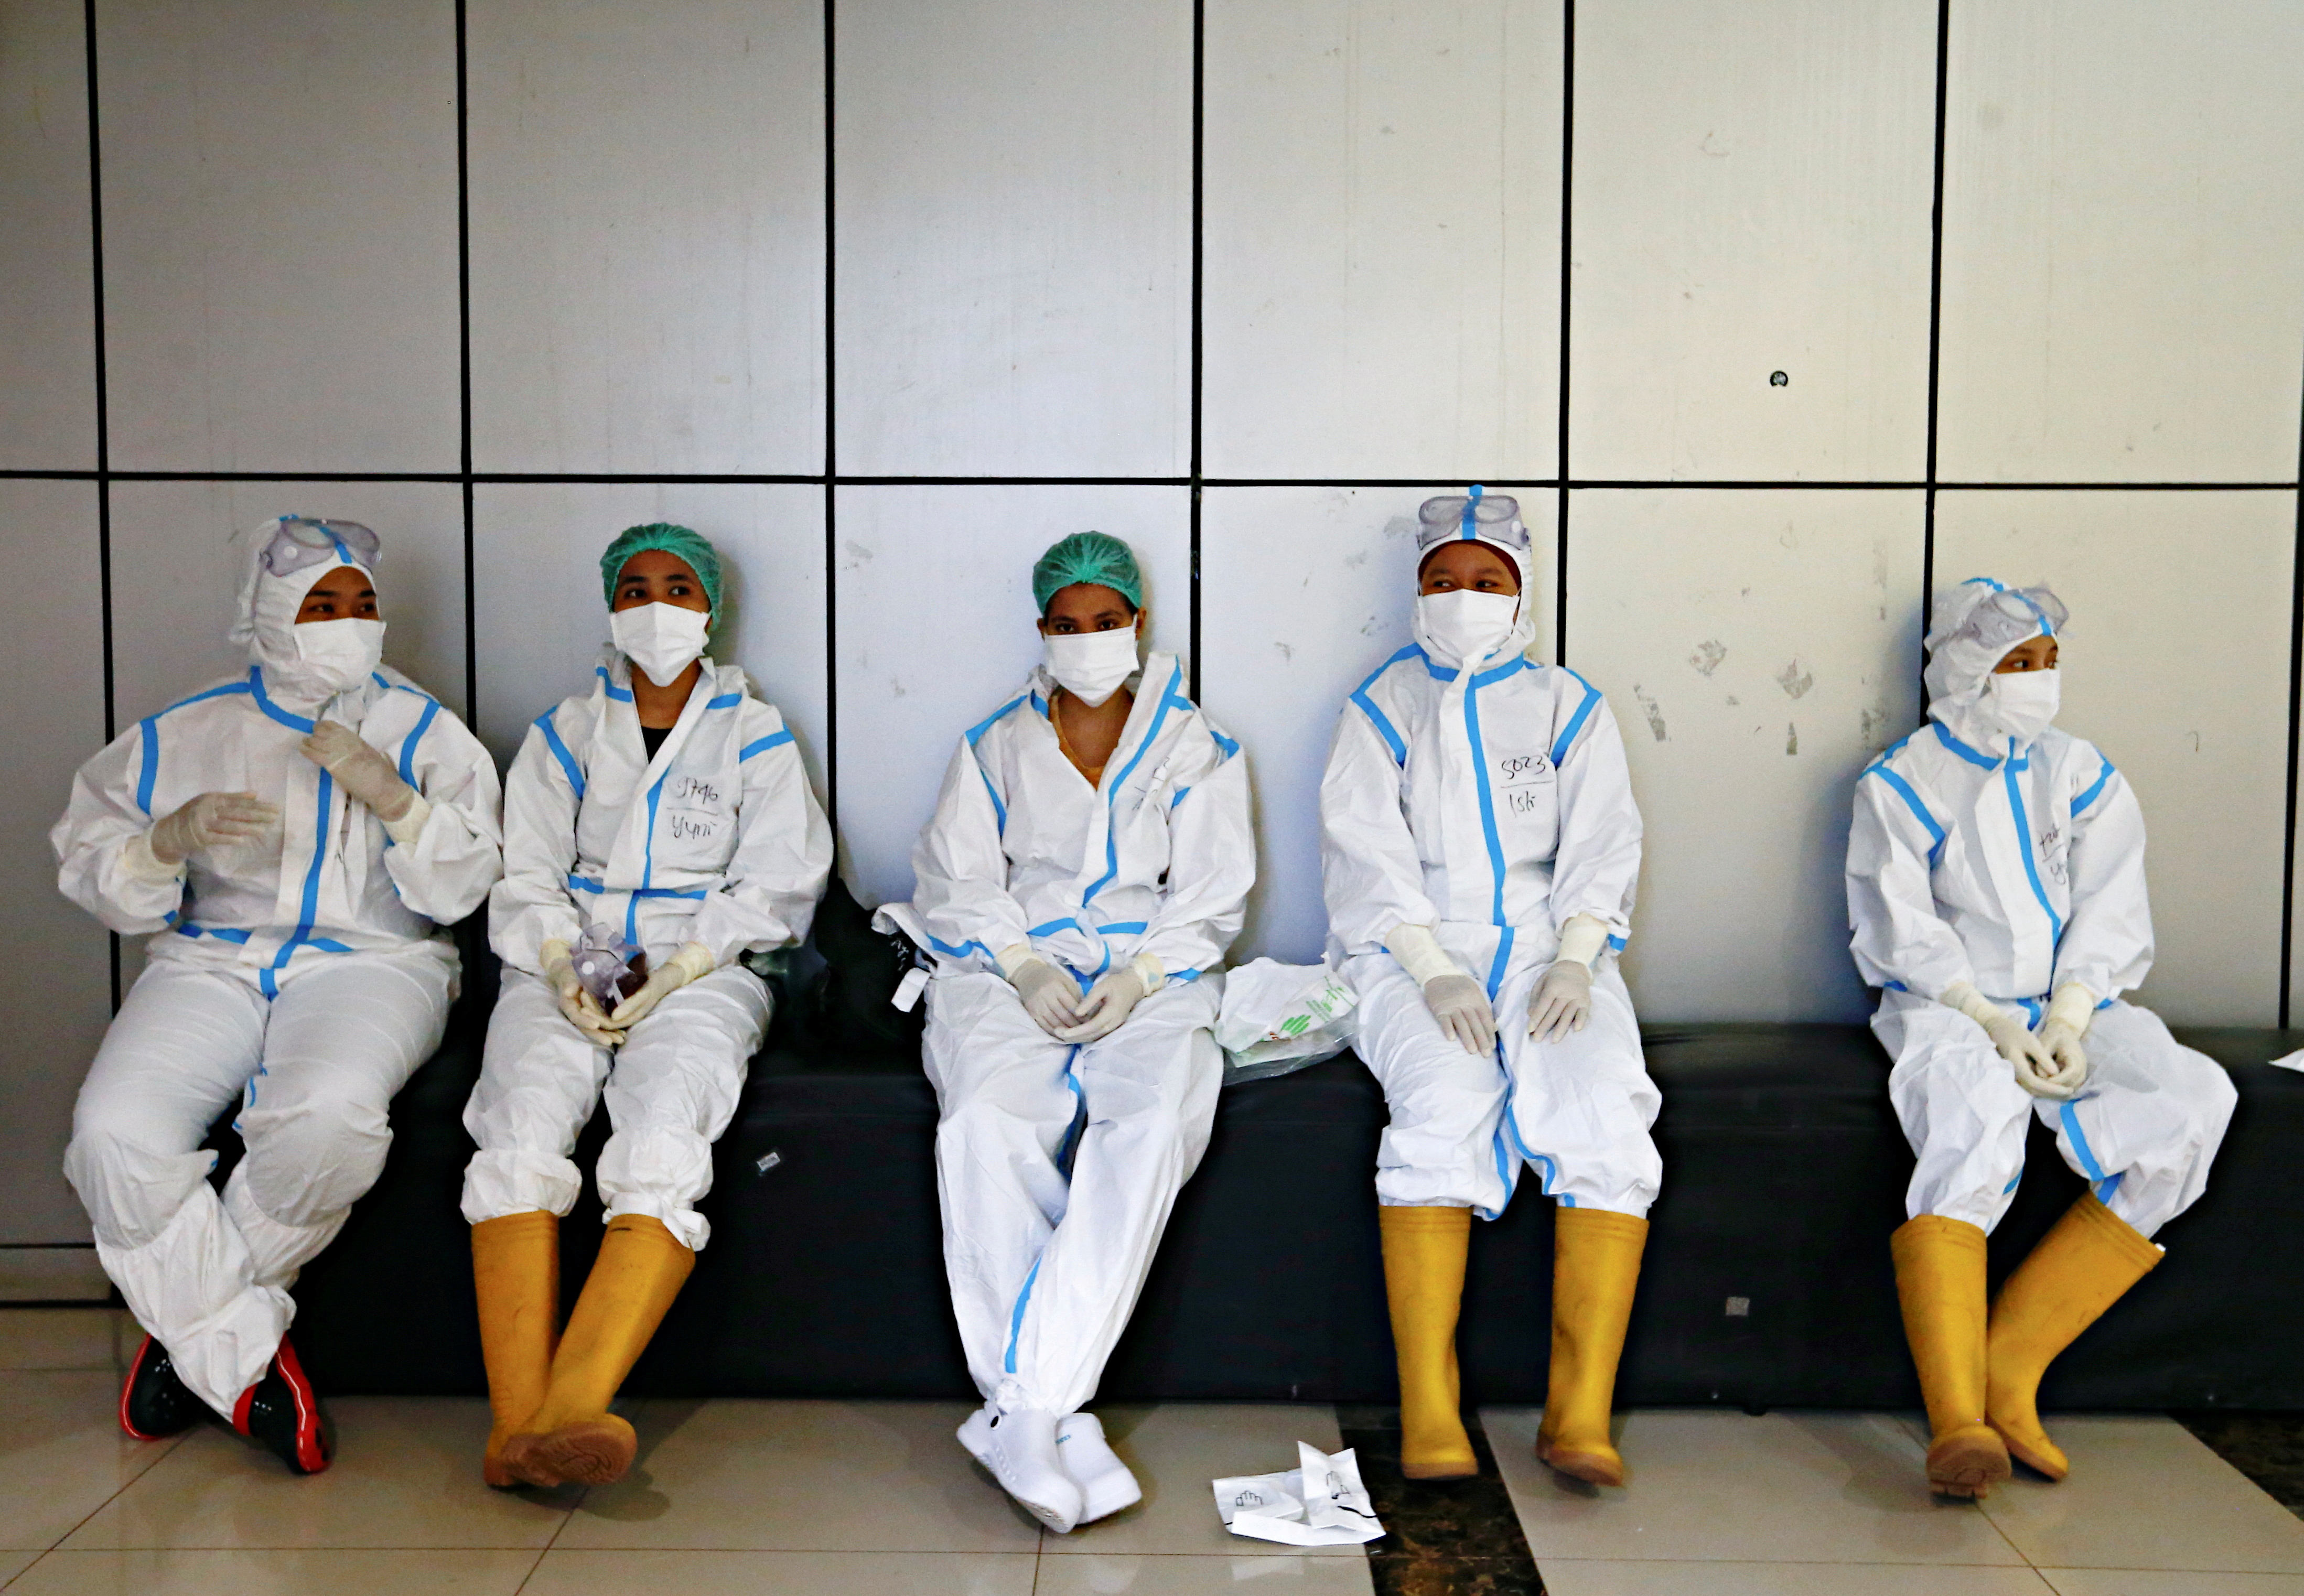 Healthcare workers wearing PPE get ready to treat patients at the emergency hospital for COVID-19, in Jakarta